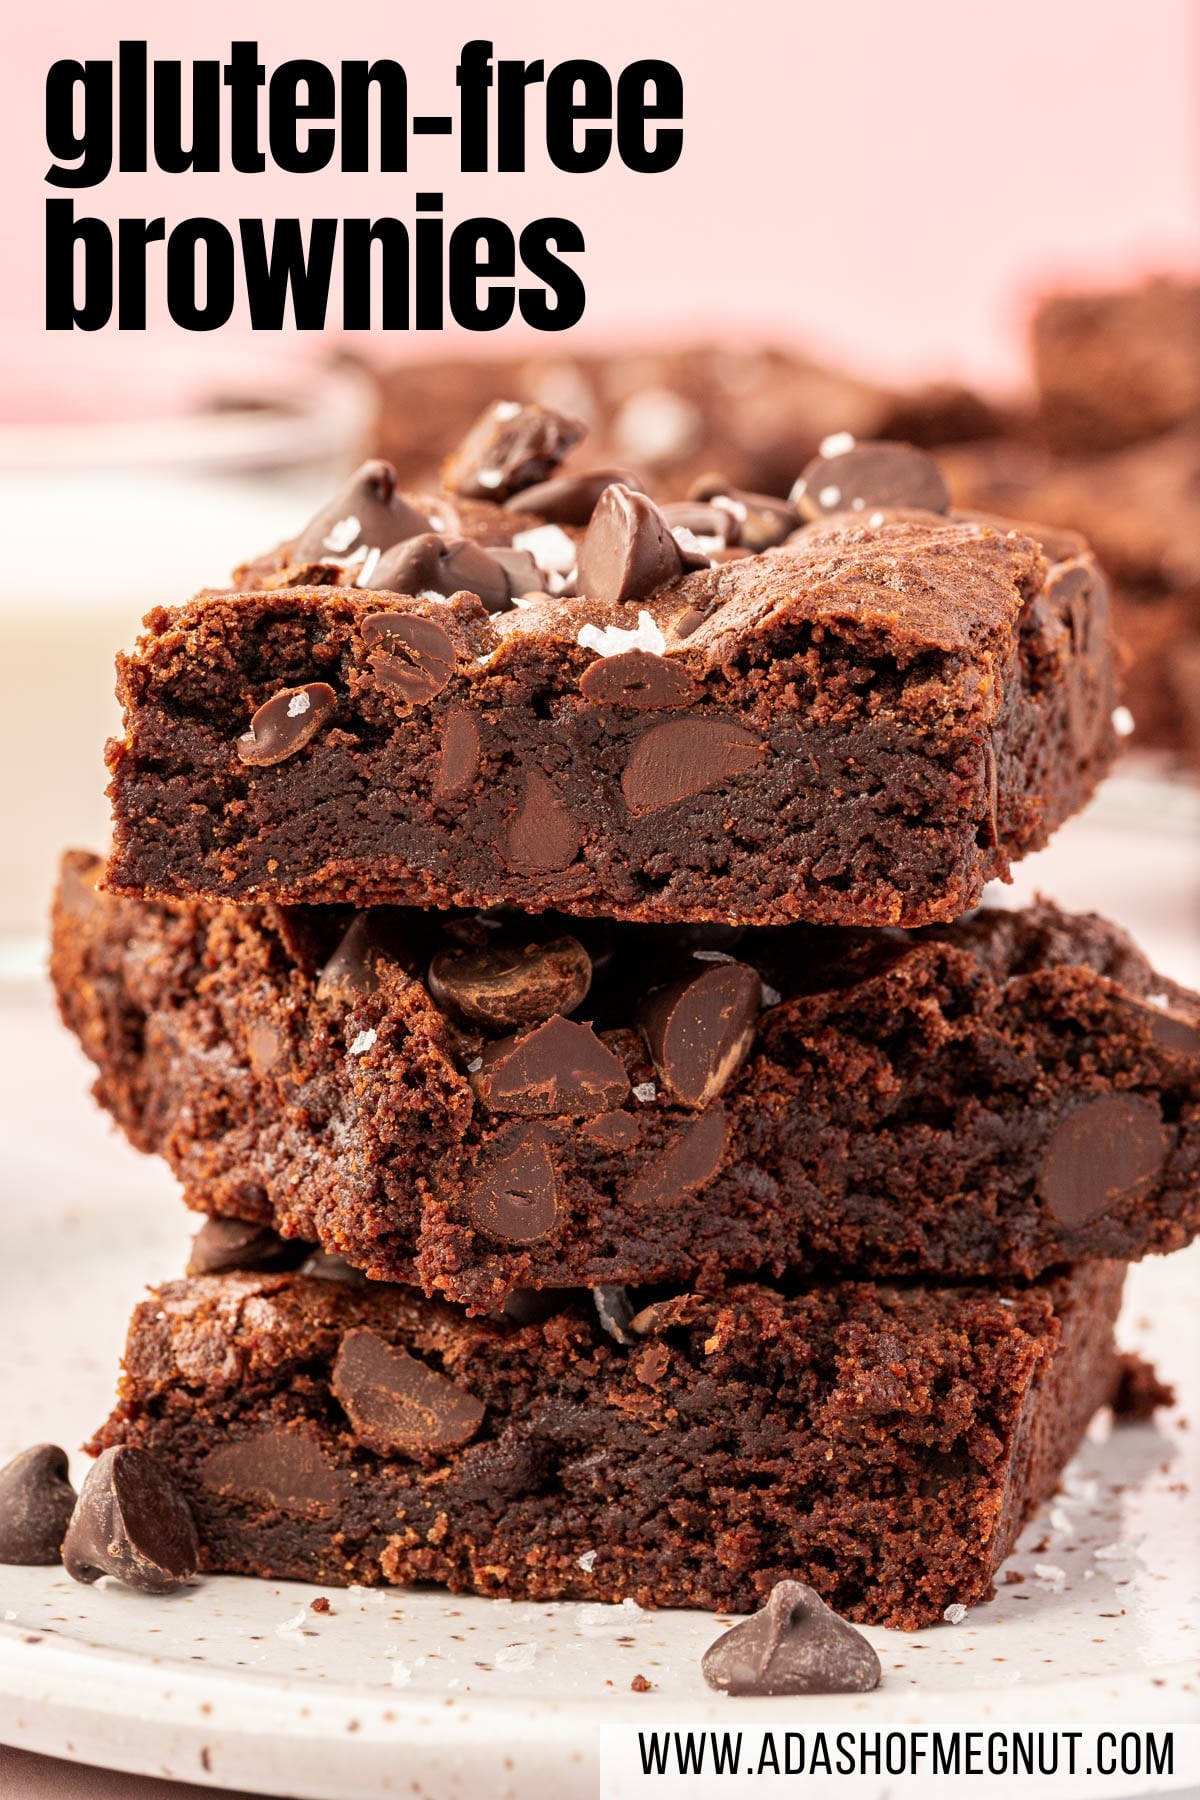 A stack of three gluten-free brownies on a small dessert plate topped with semi-sweet chocolate chips and flaky sea salt with a text overlay.